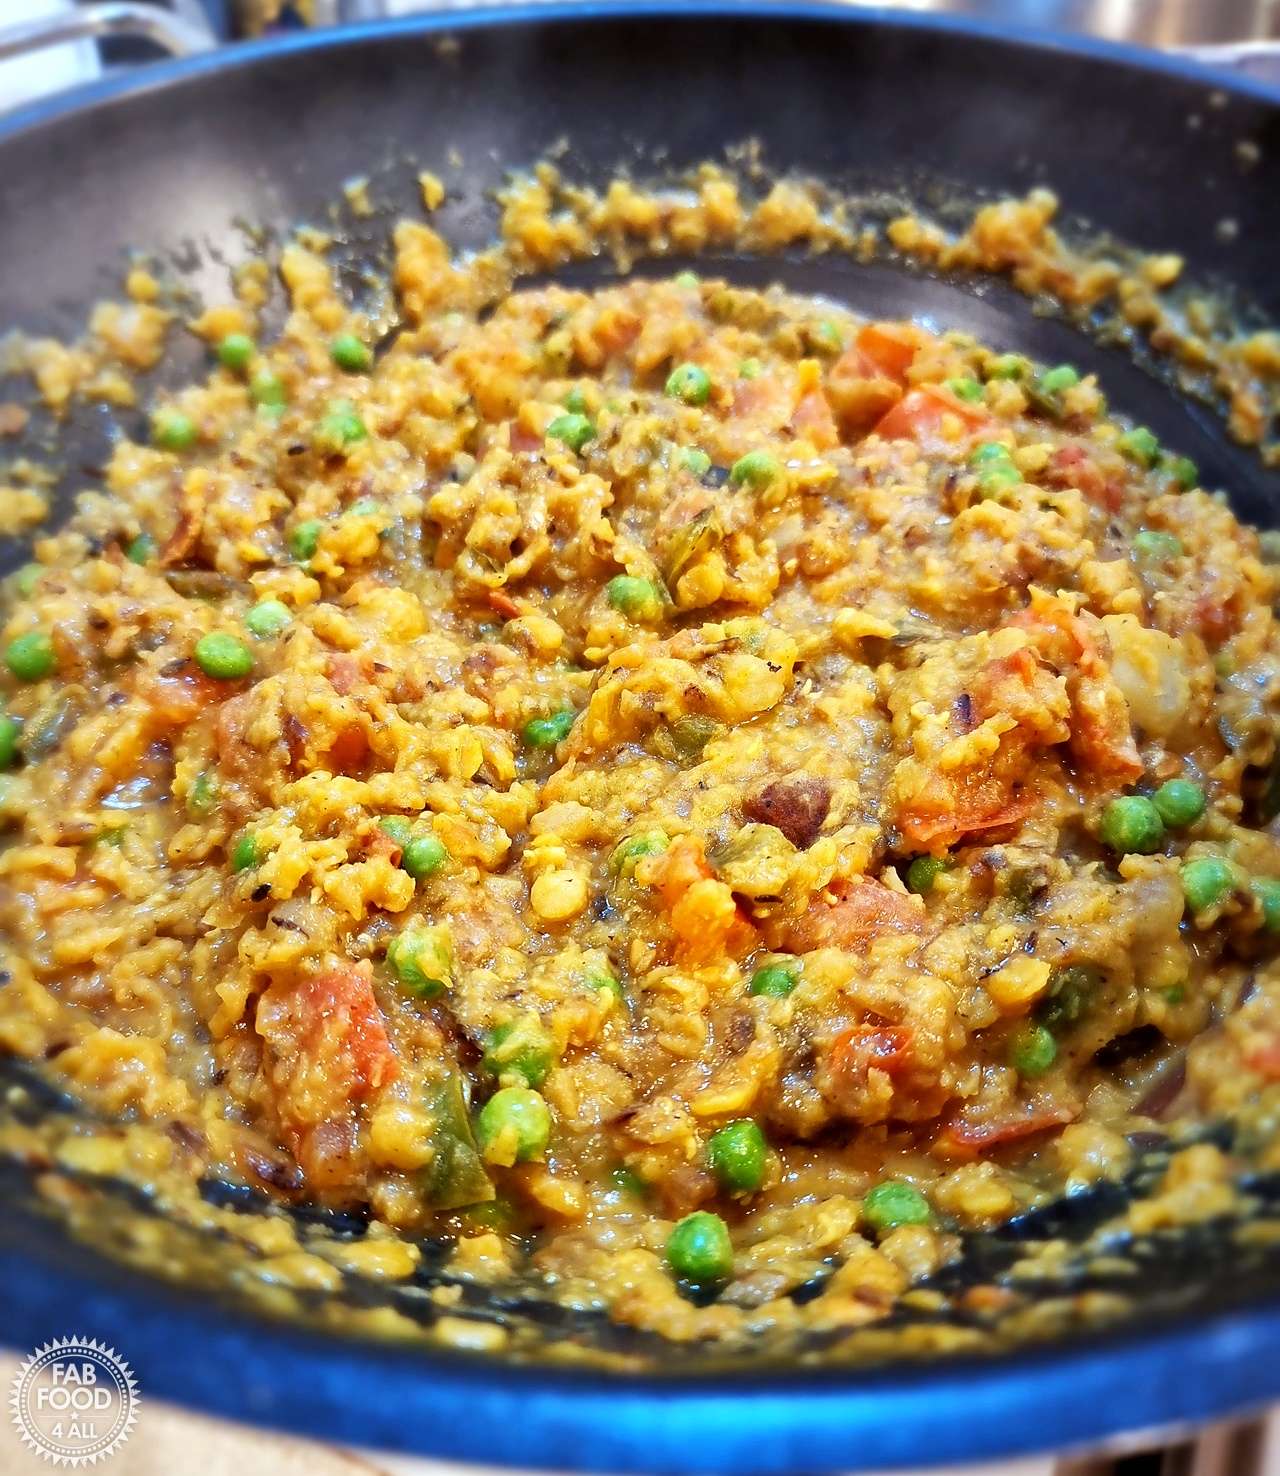 Vegetable Dhal Curry in a pan.